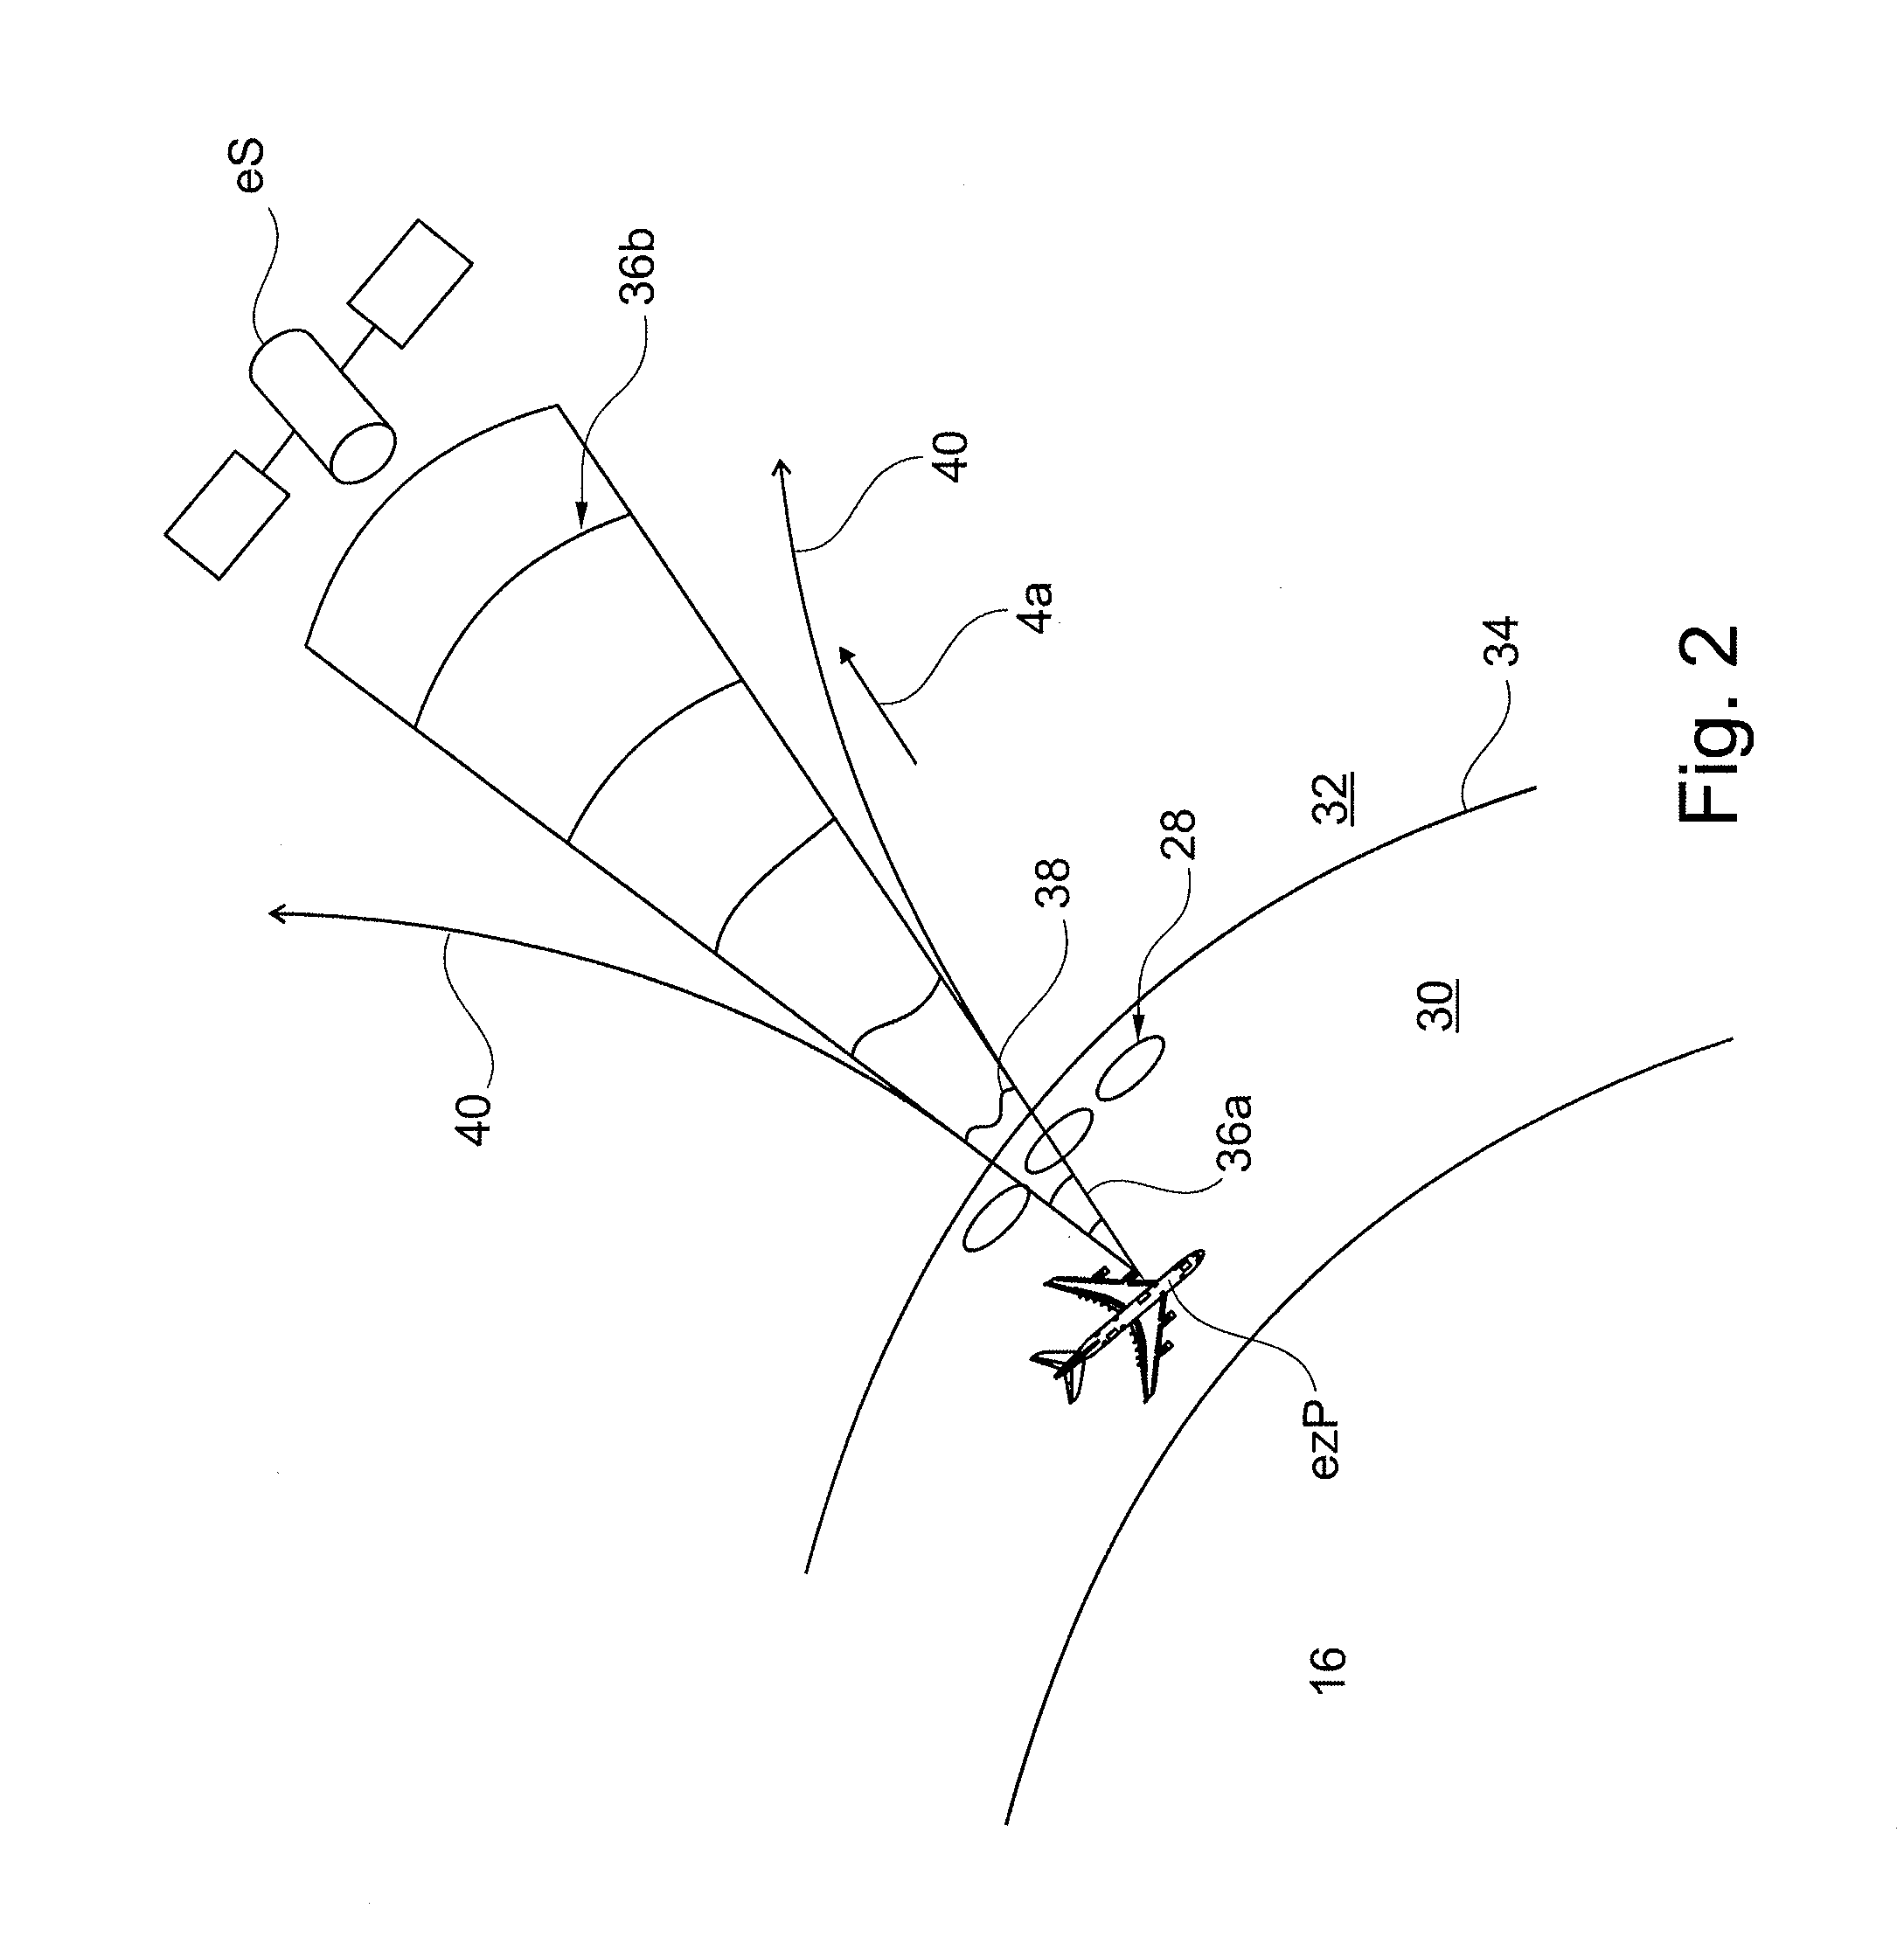 System and Method for Communication Between Two Communication Platforms